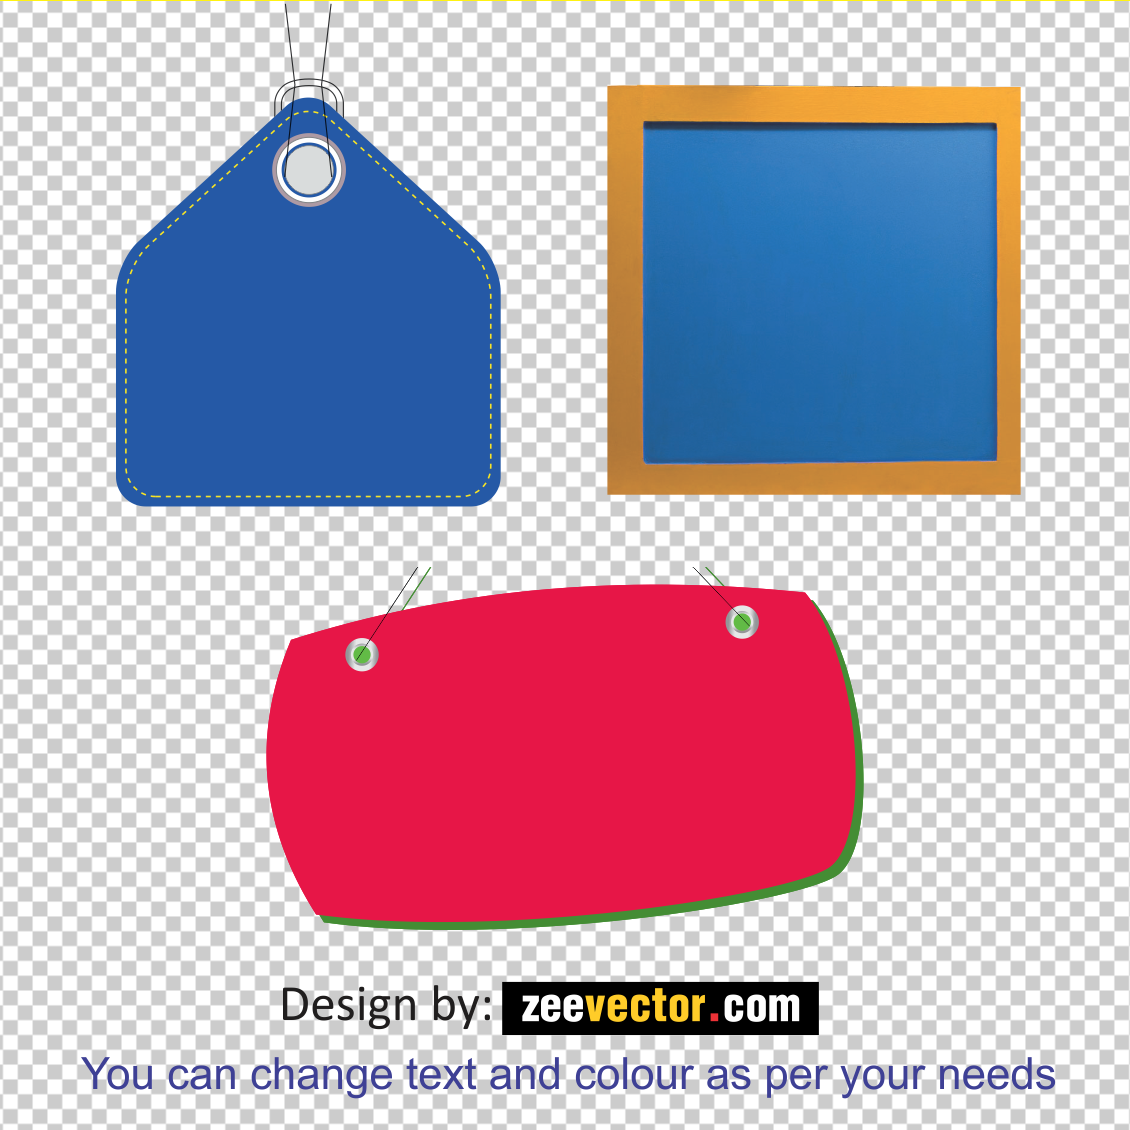 Price Tag Vector Free Download - FREE Vector Design - Cdr, Ai, EPS